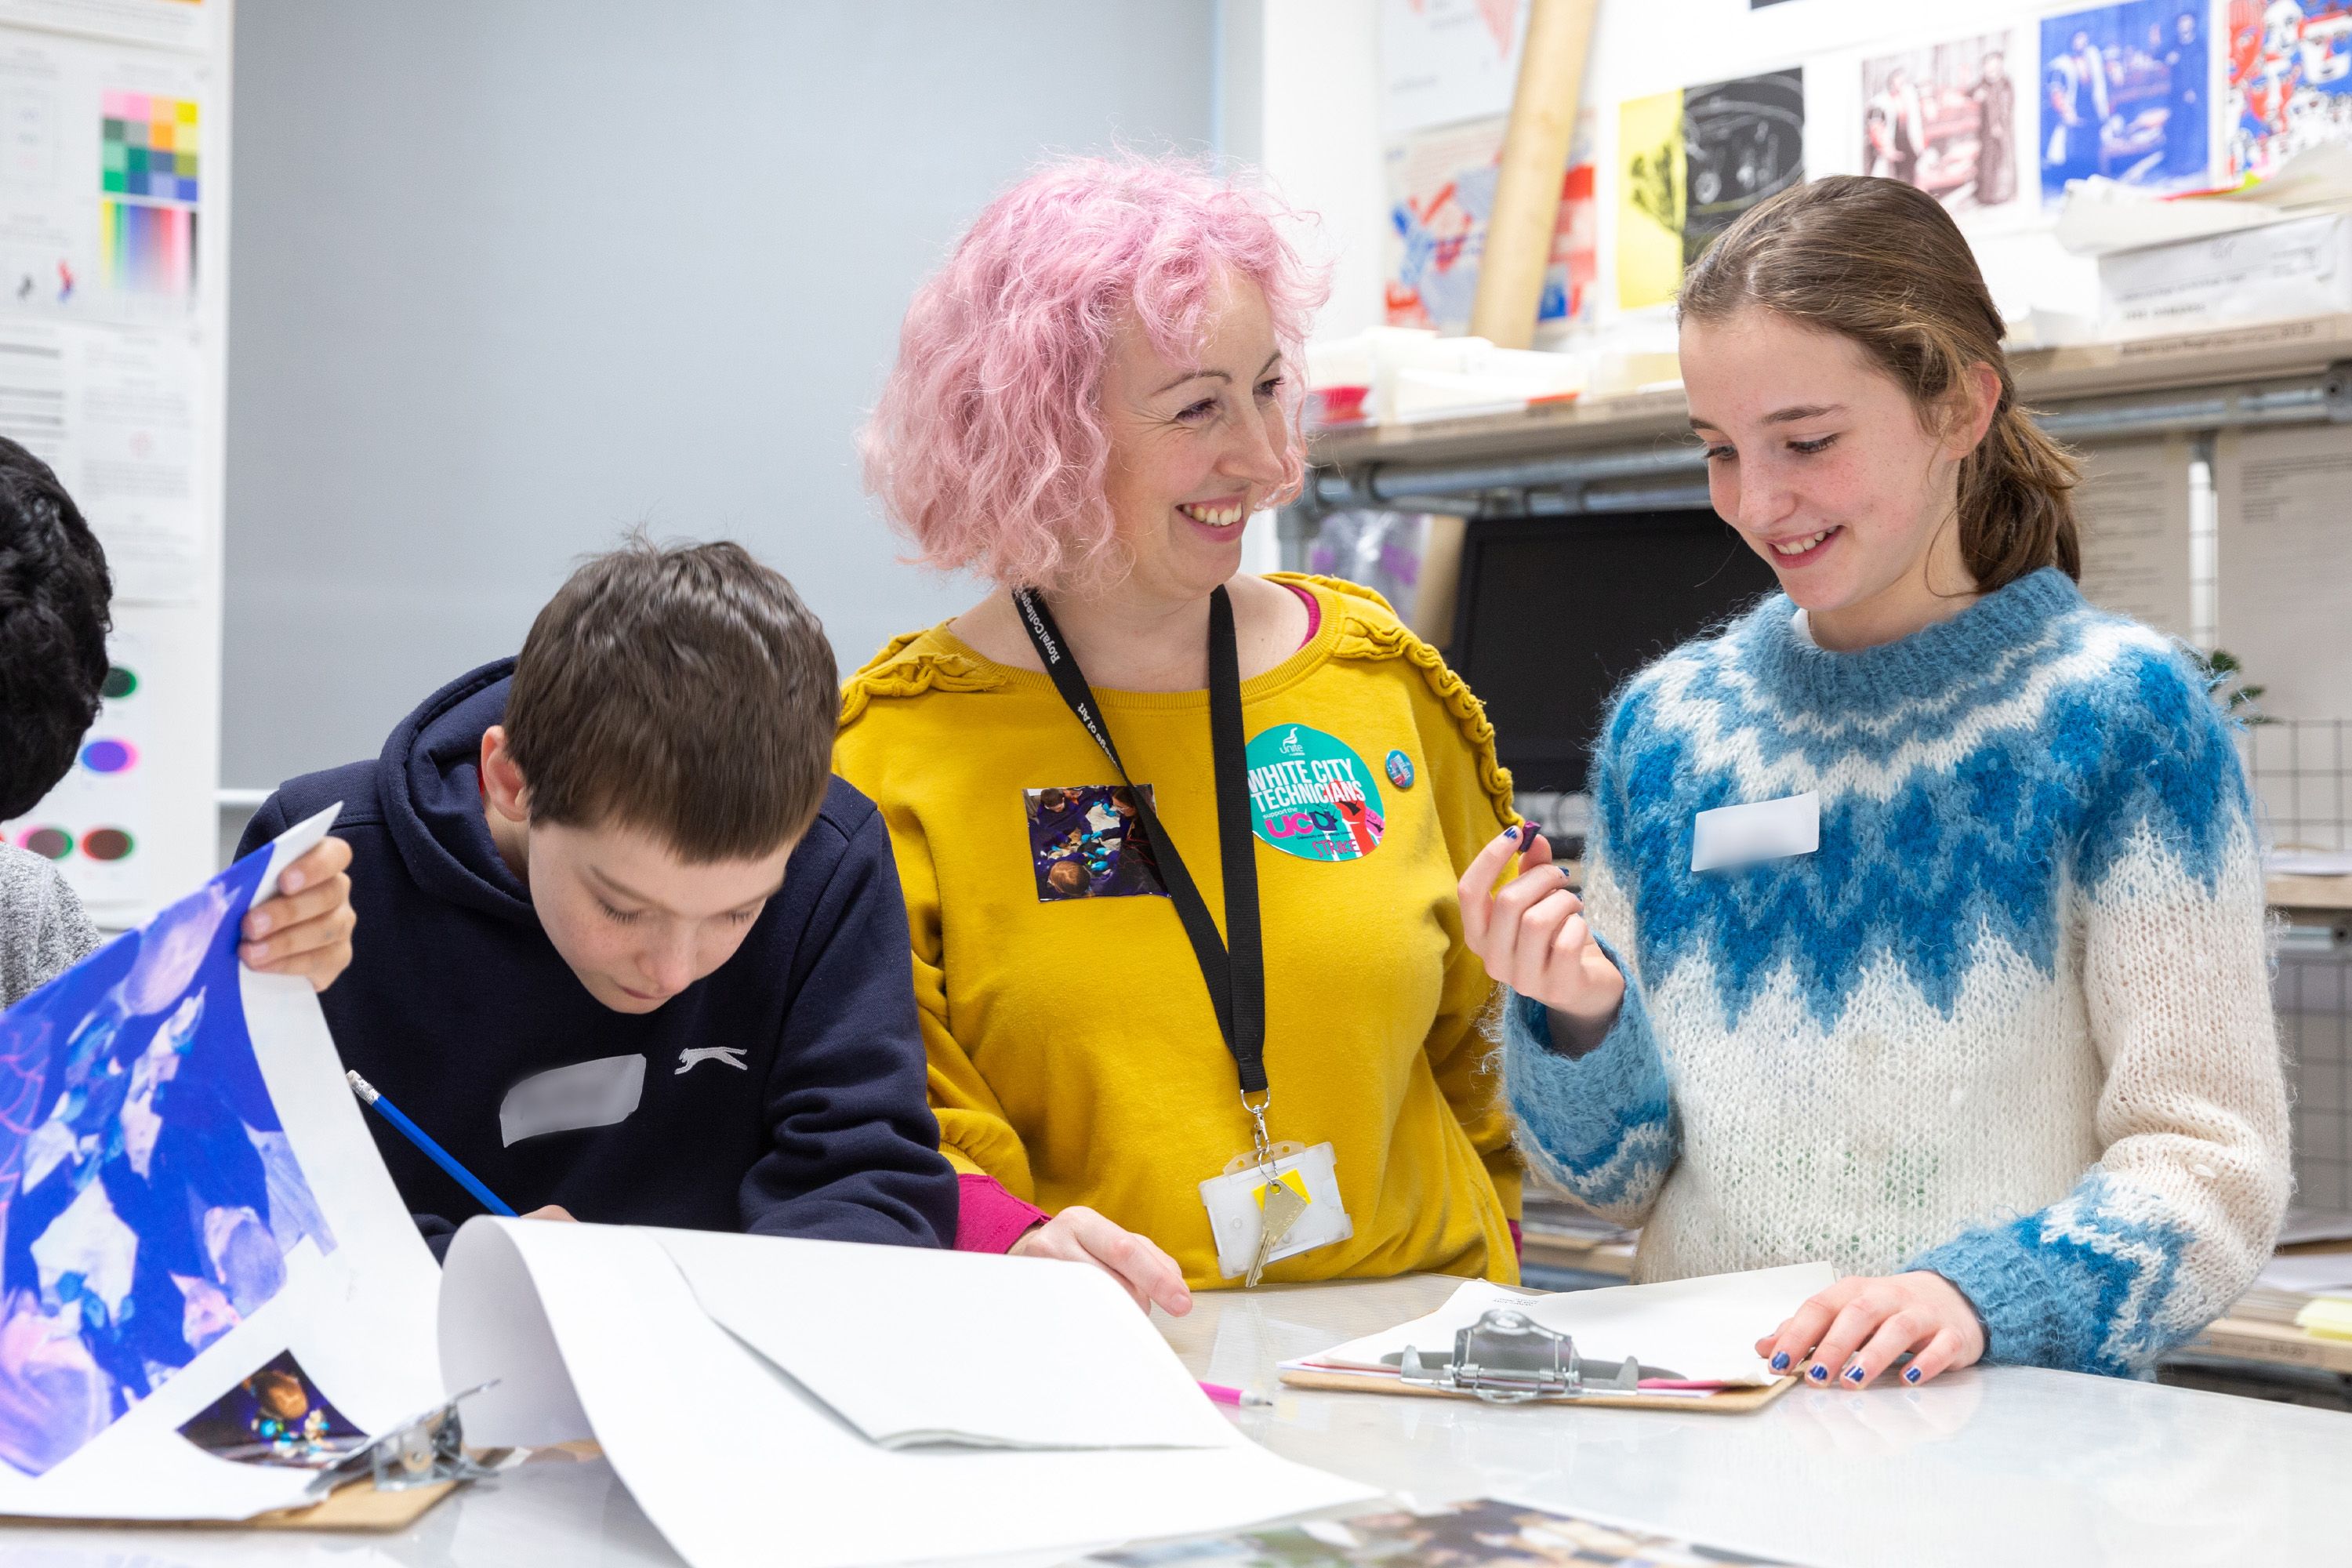 A pink-haired woman in a yellow top smiling at two children who are writing on paper